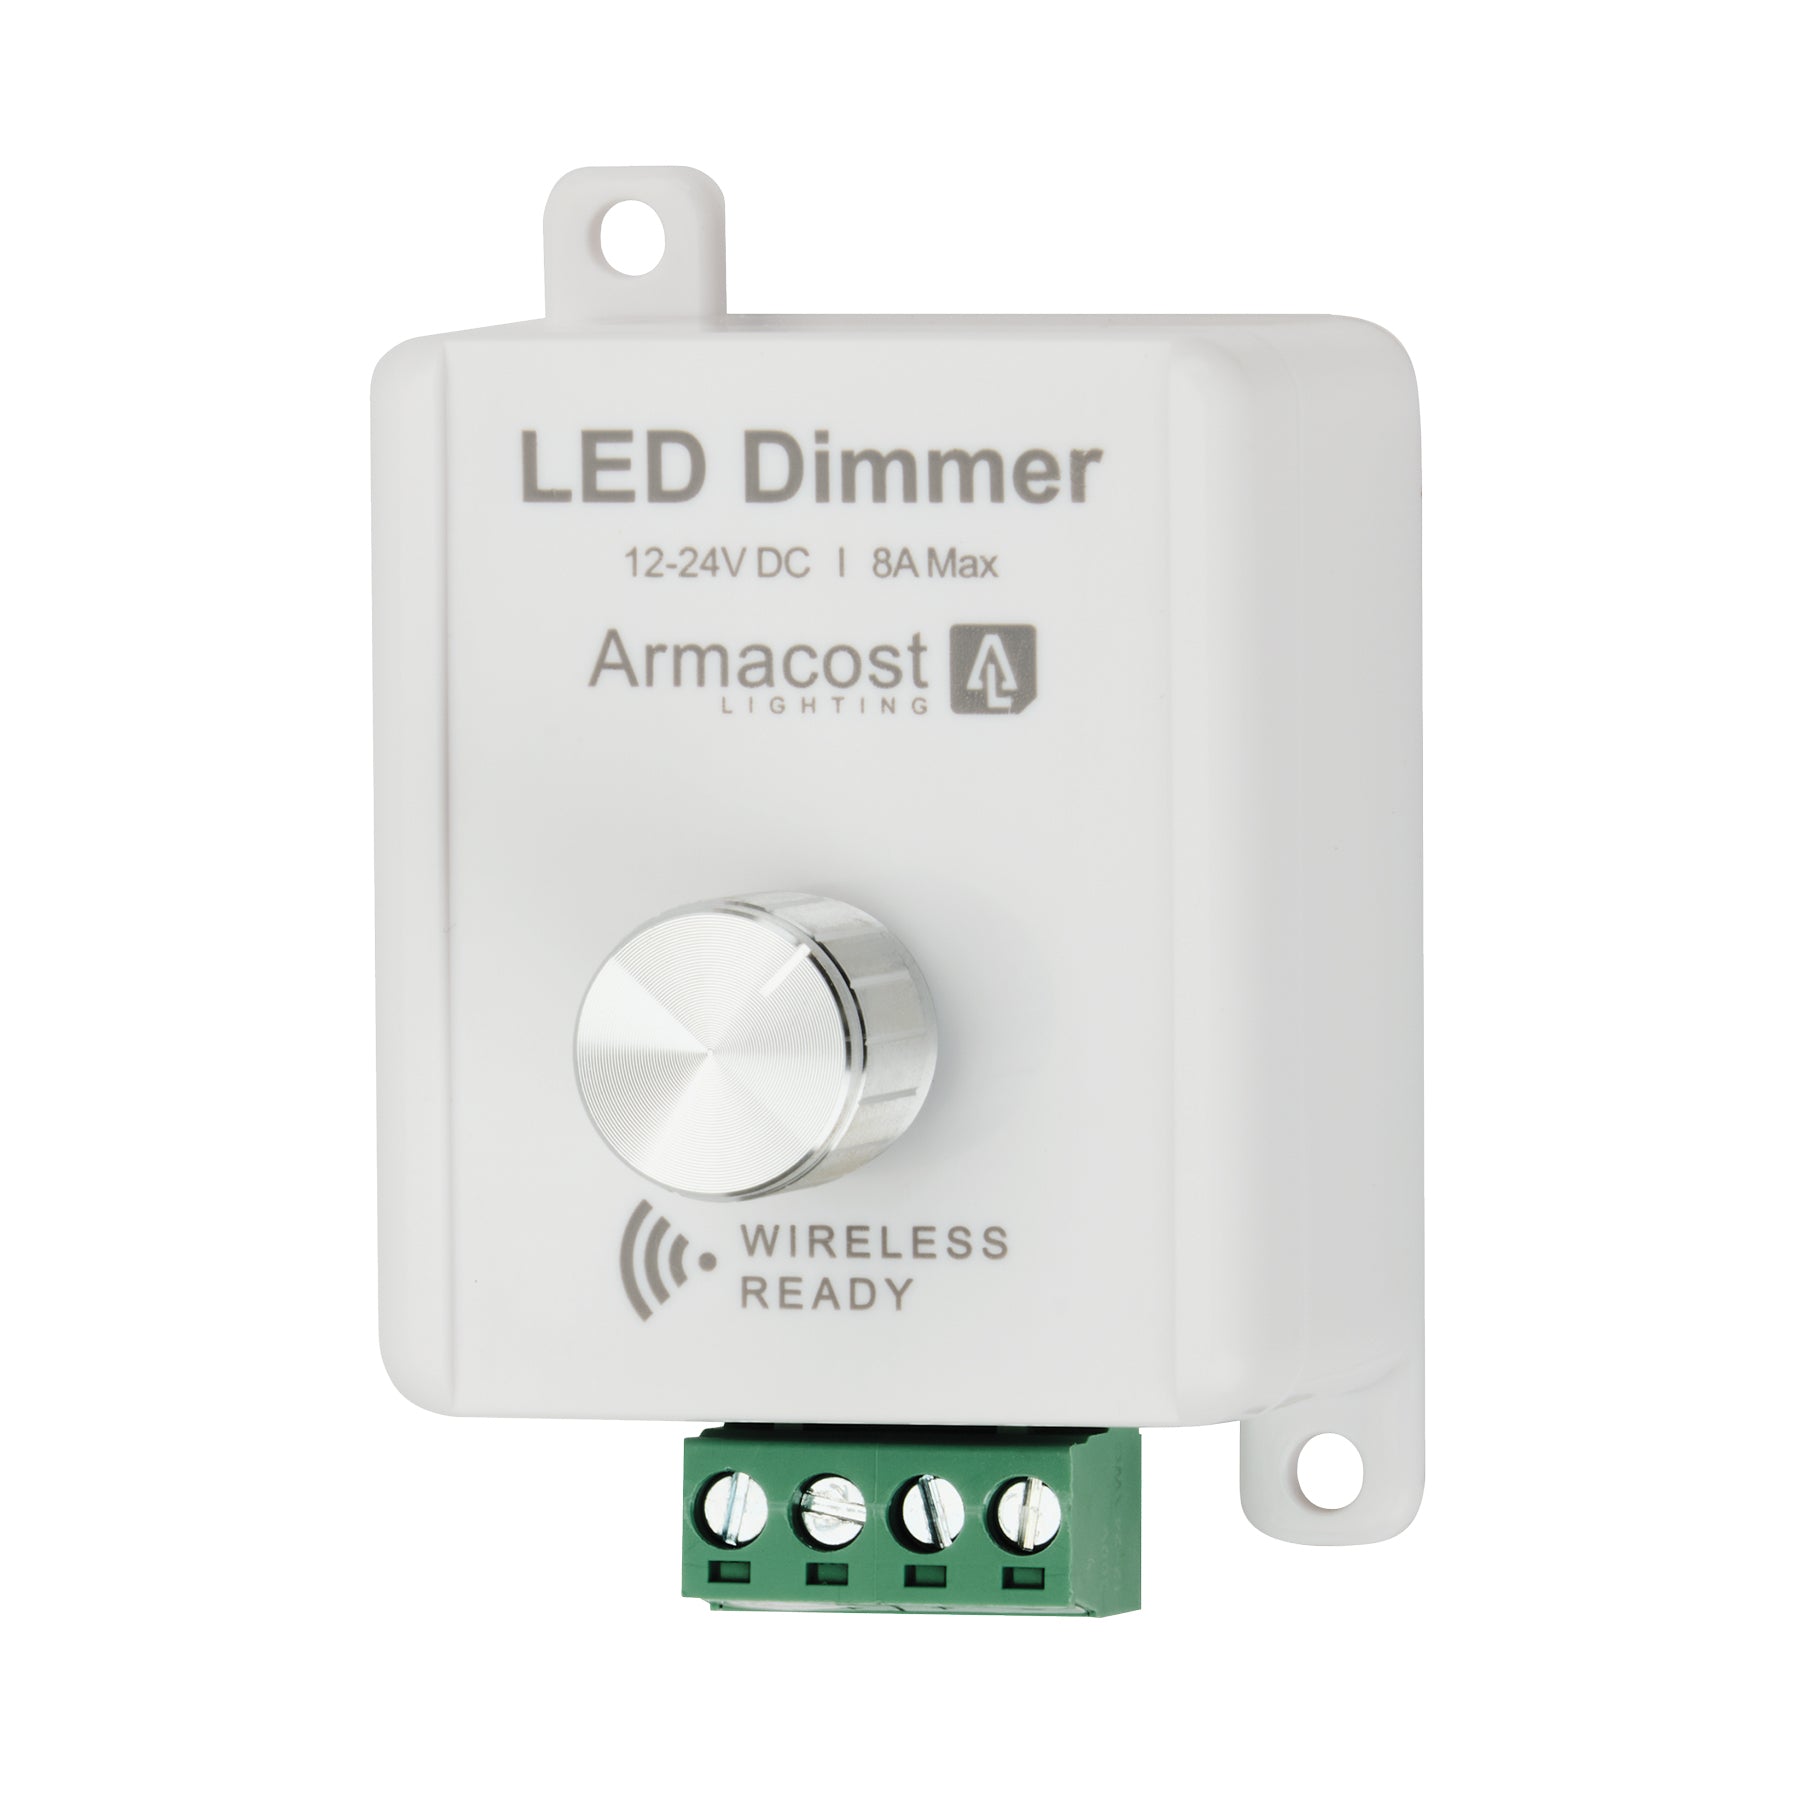 Armacost Lighting Rotary Knob LED Dimmer, White